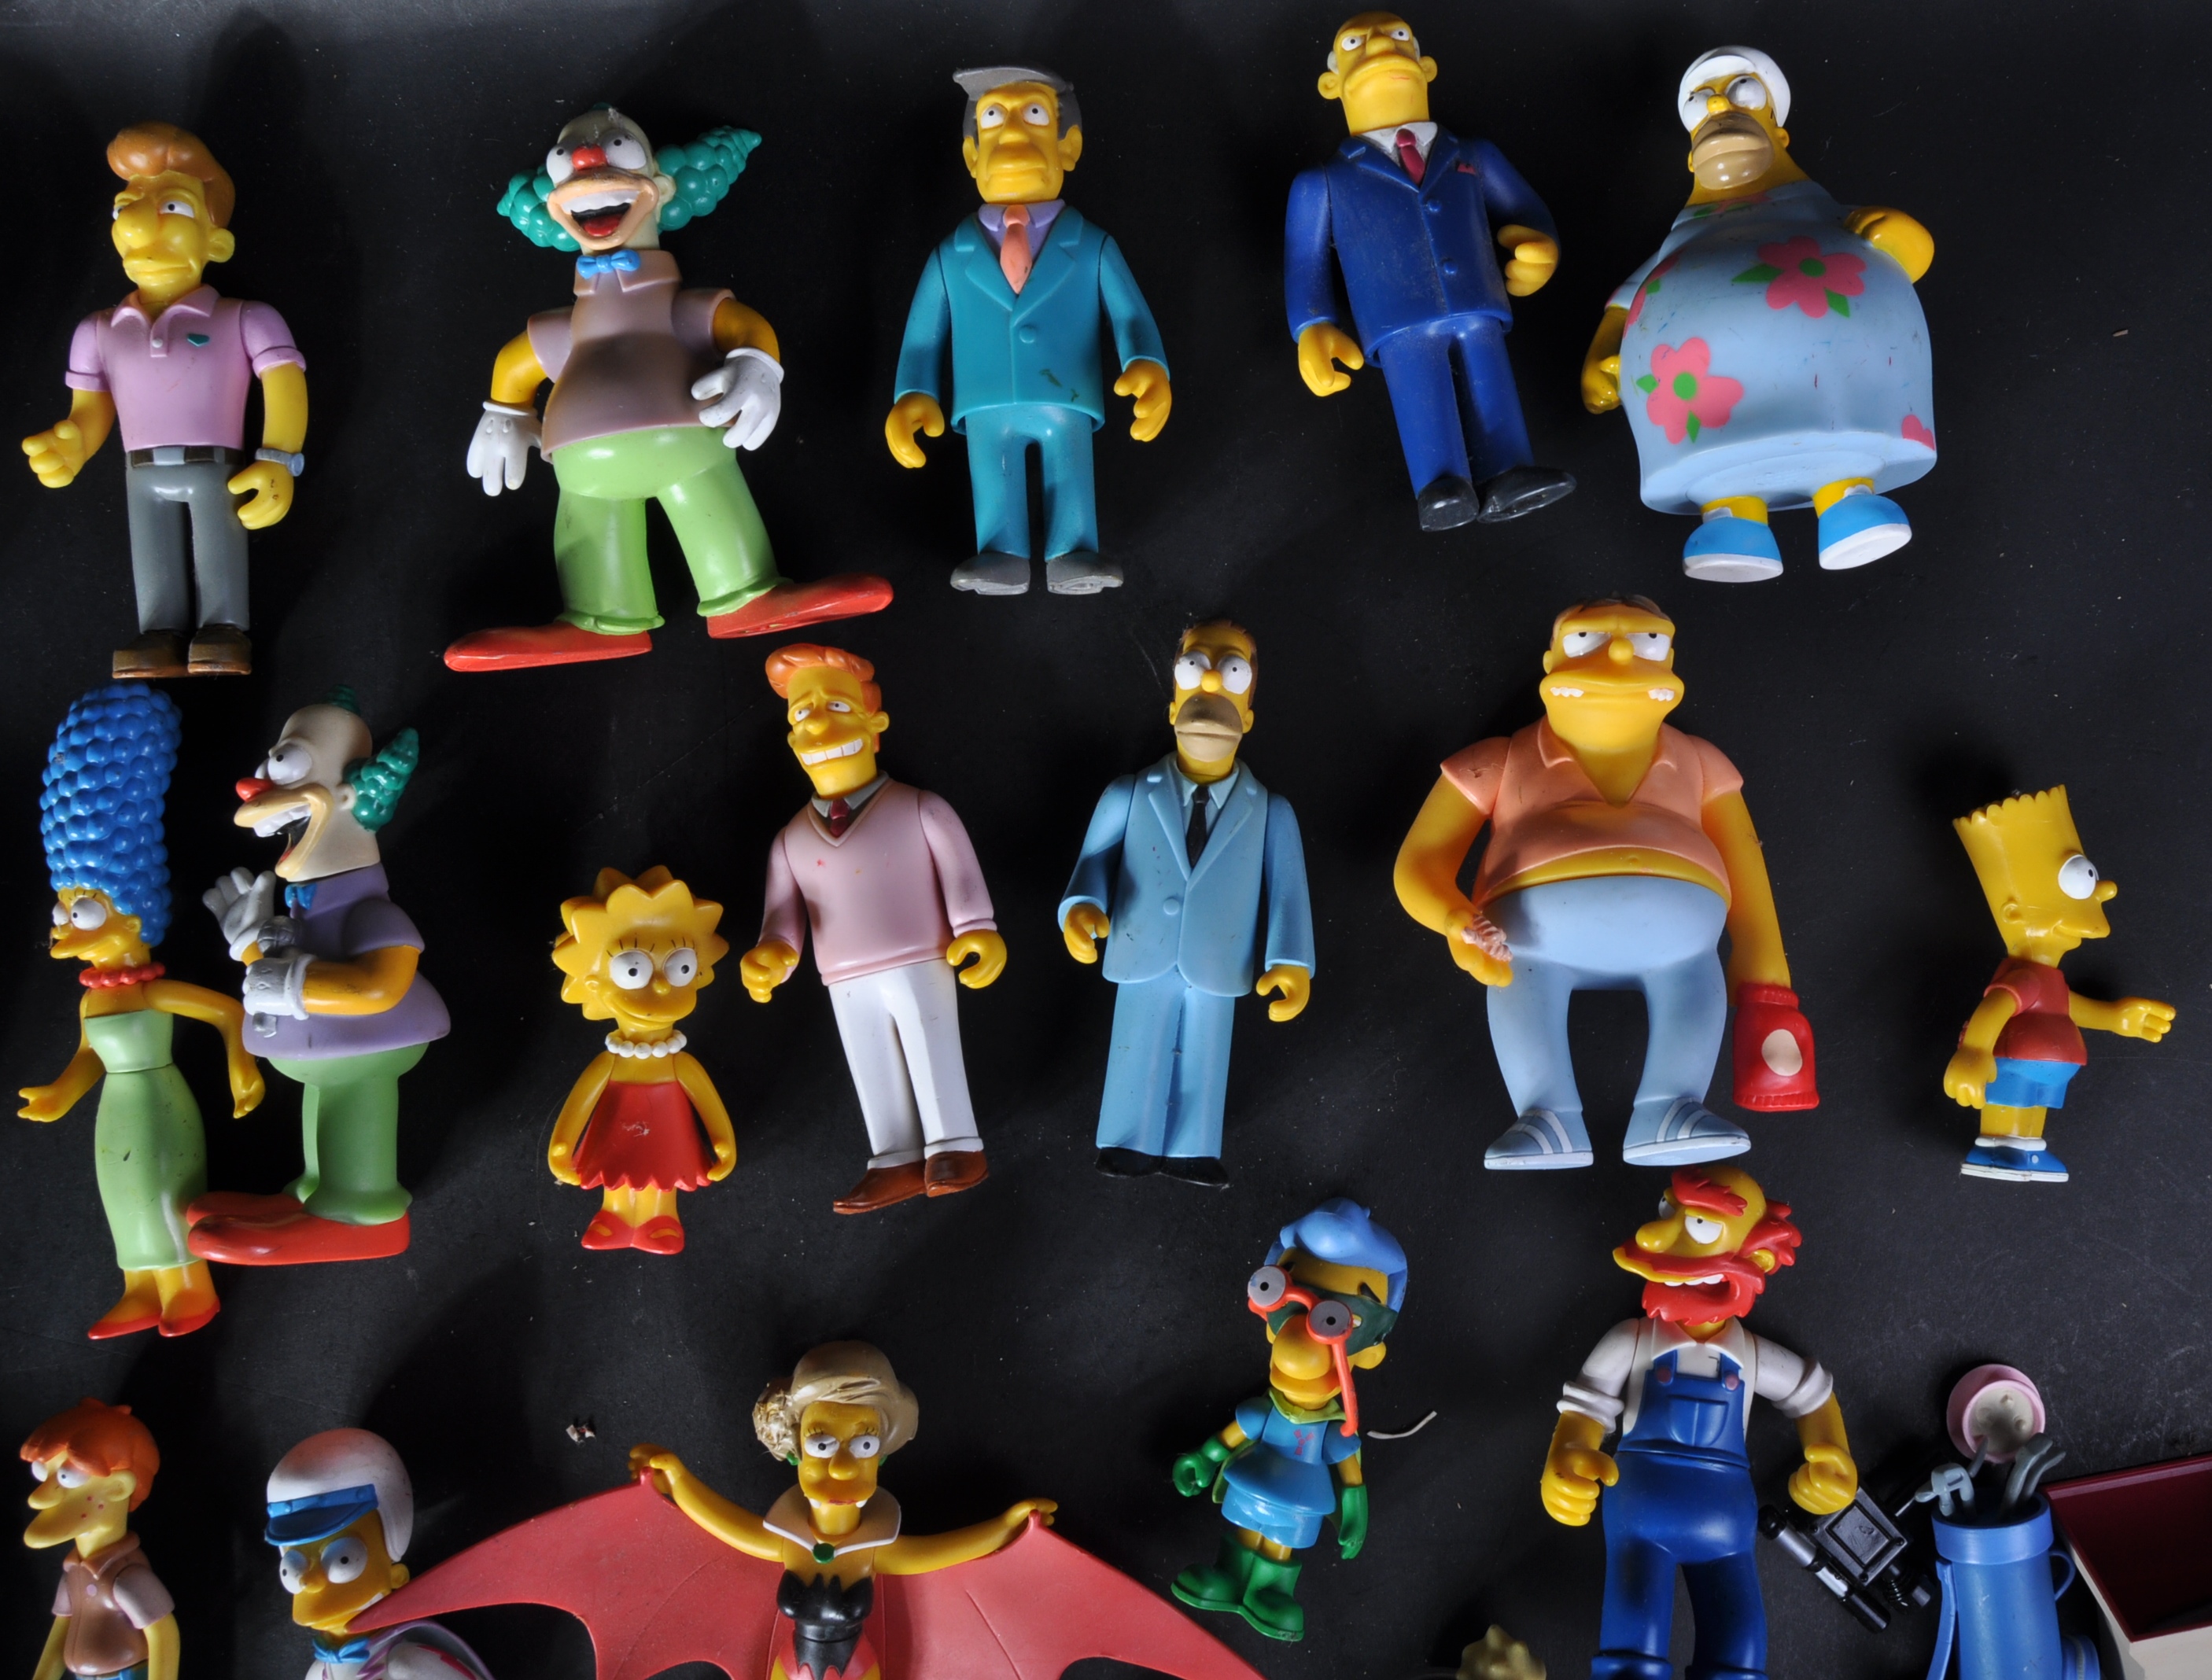 THE SIMPSONS - PLAYMATES ' WORLD OF SPRINGFIELD ' FIGURINES - Image 3 of 5